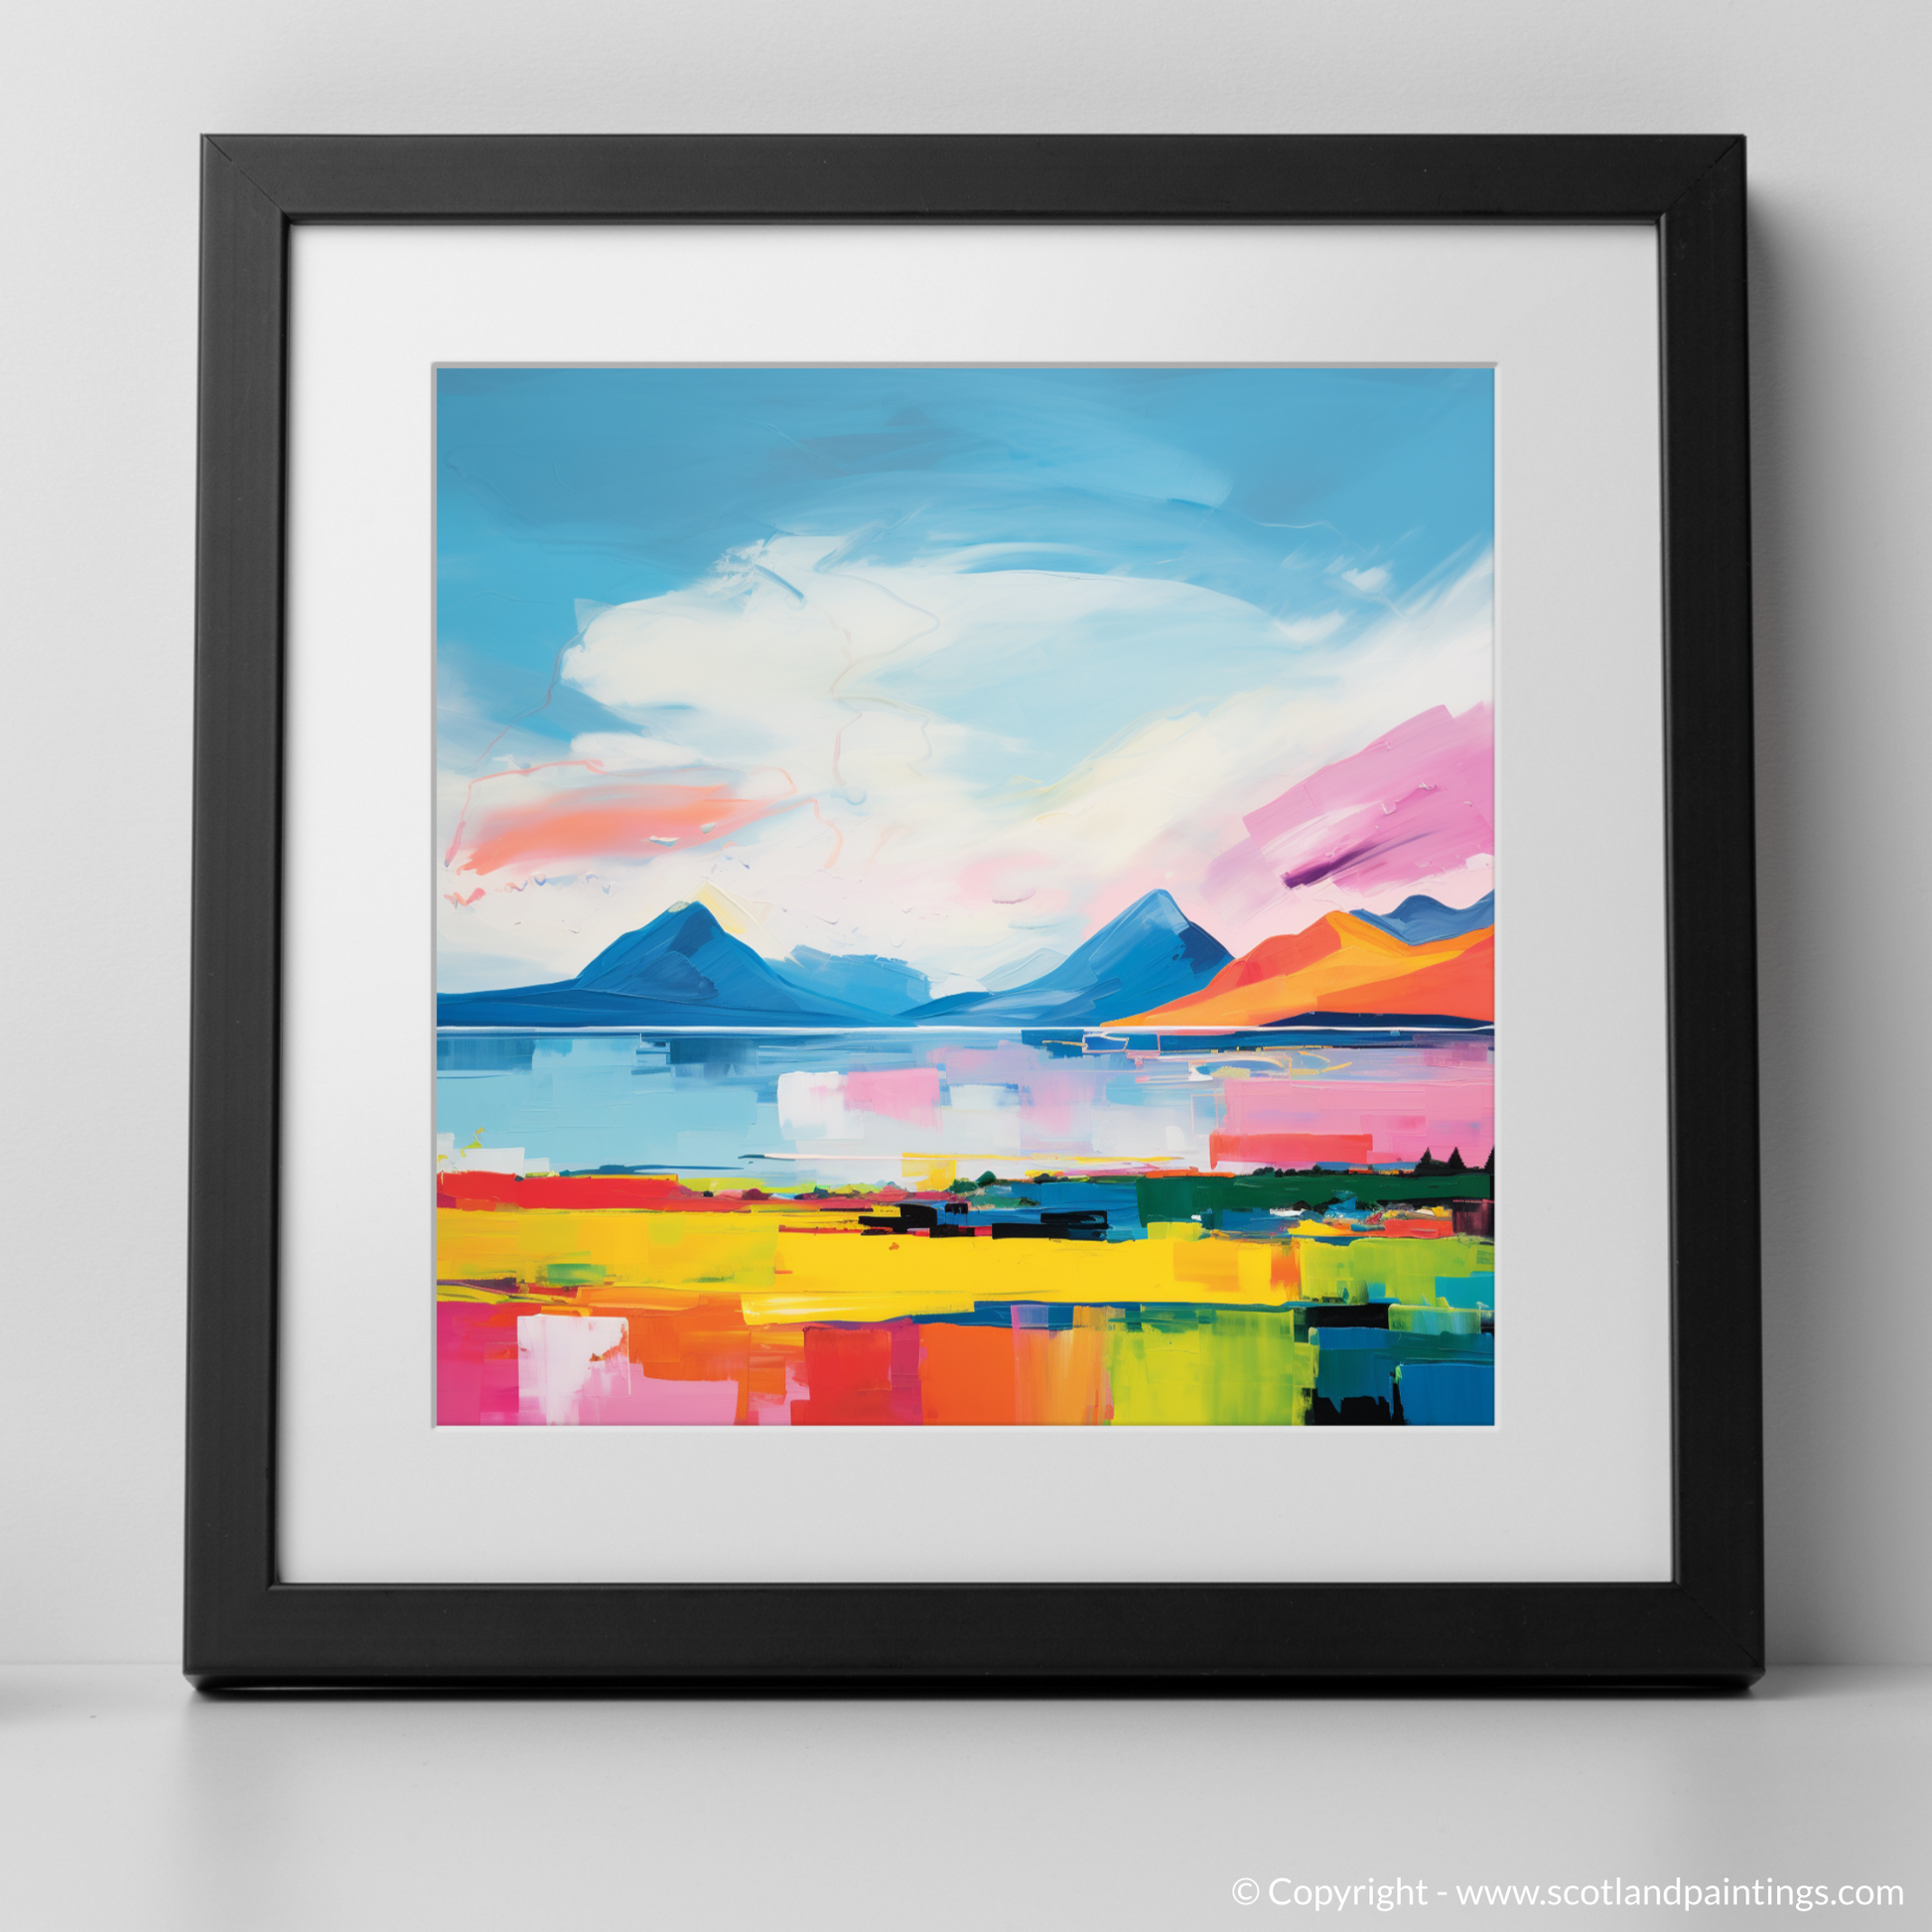 Art Print of Isle of Arran, Firth of Clyde in summer with a black frame